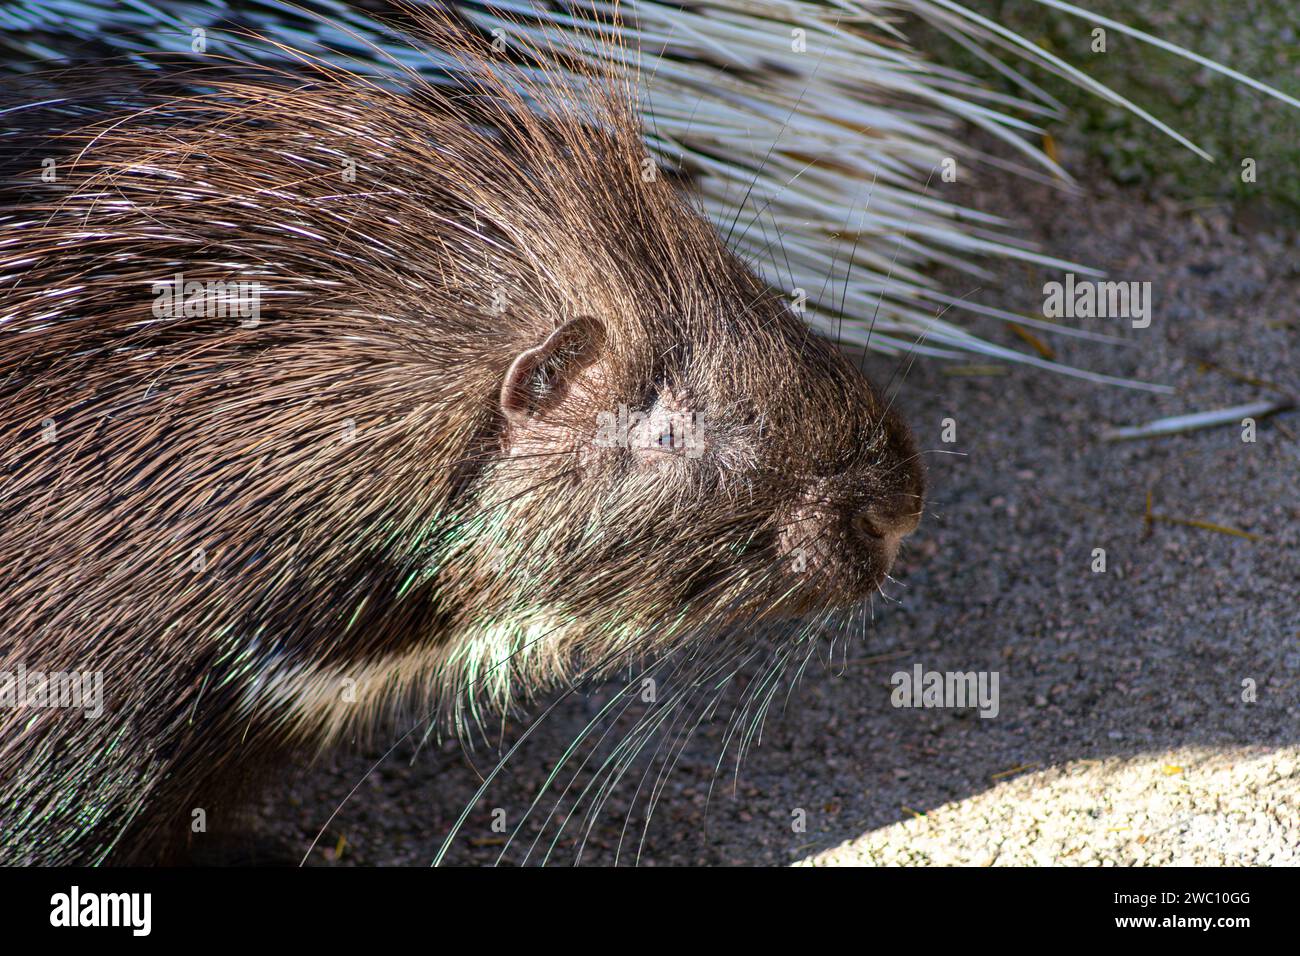 The porcupine has very pointed quills that fall off and are replaced, and it also has very small eyes. Stock Photo